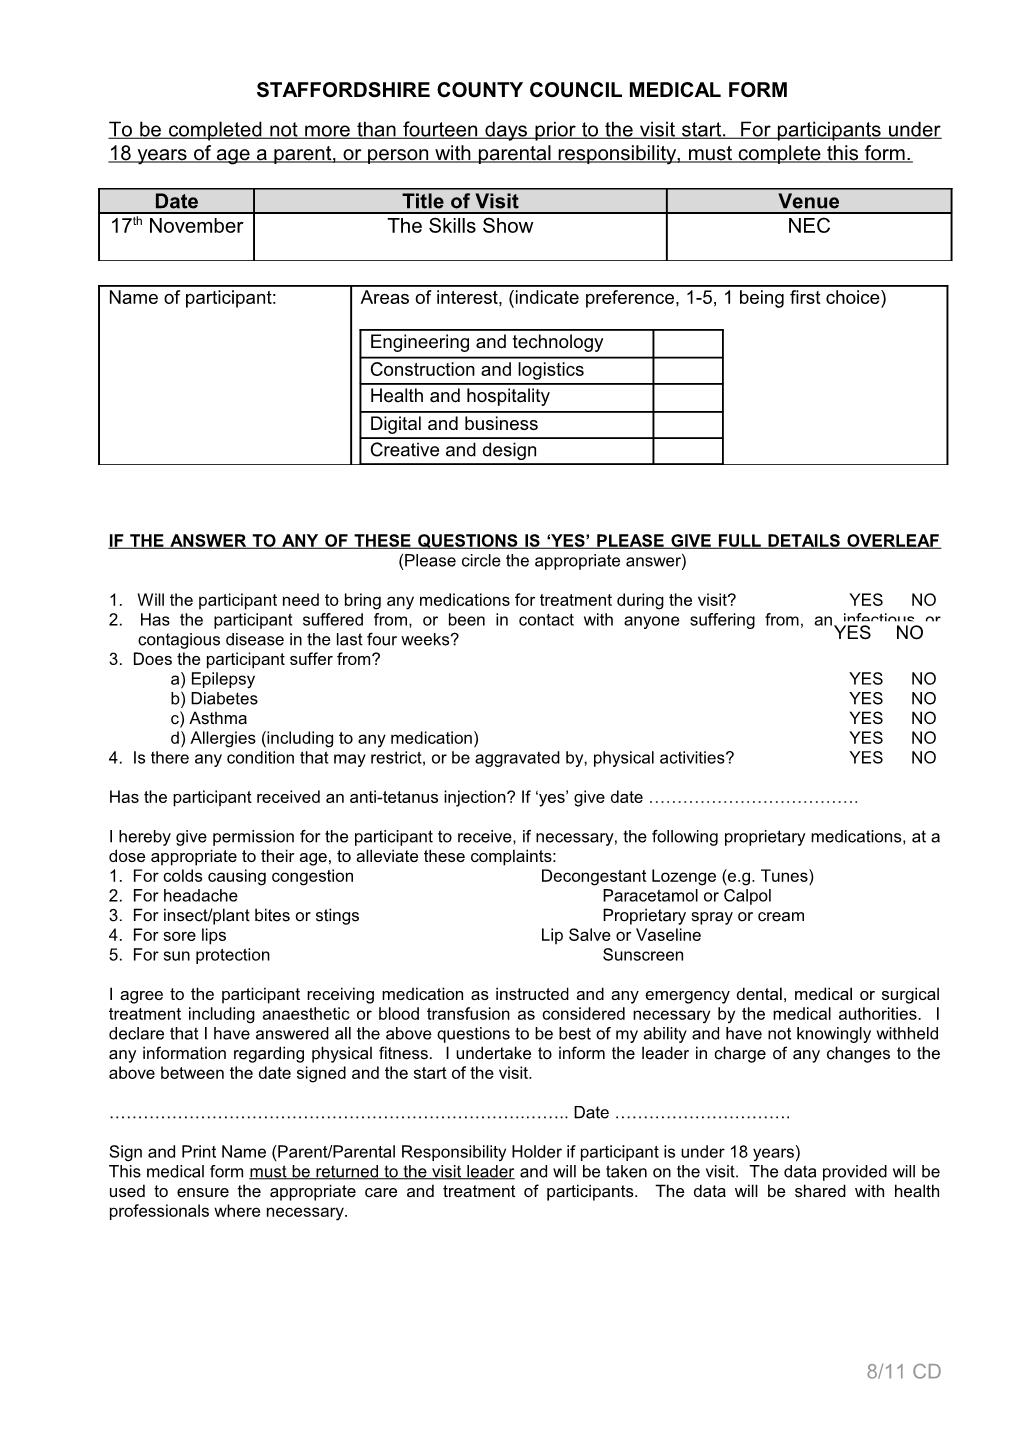 Staffordshire County Council Medical Form